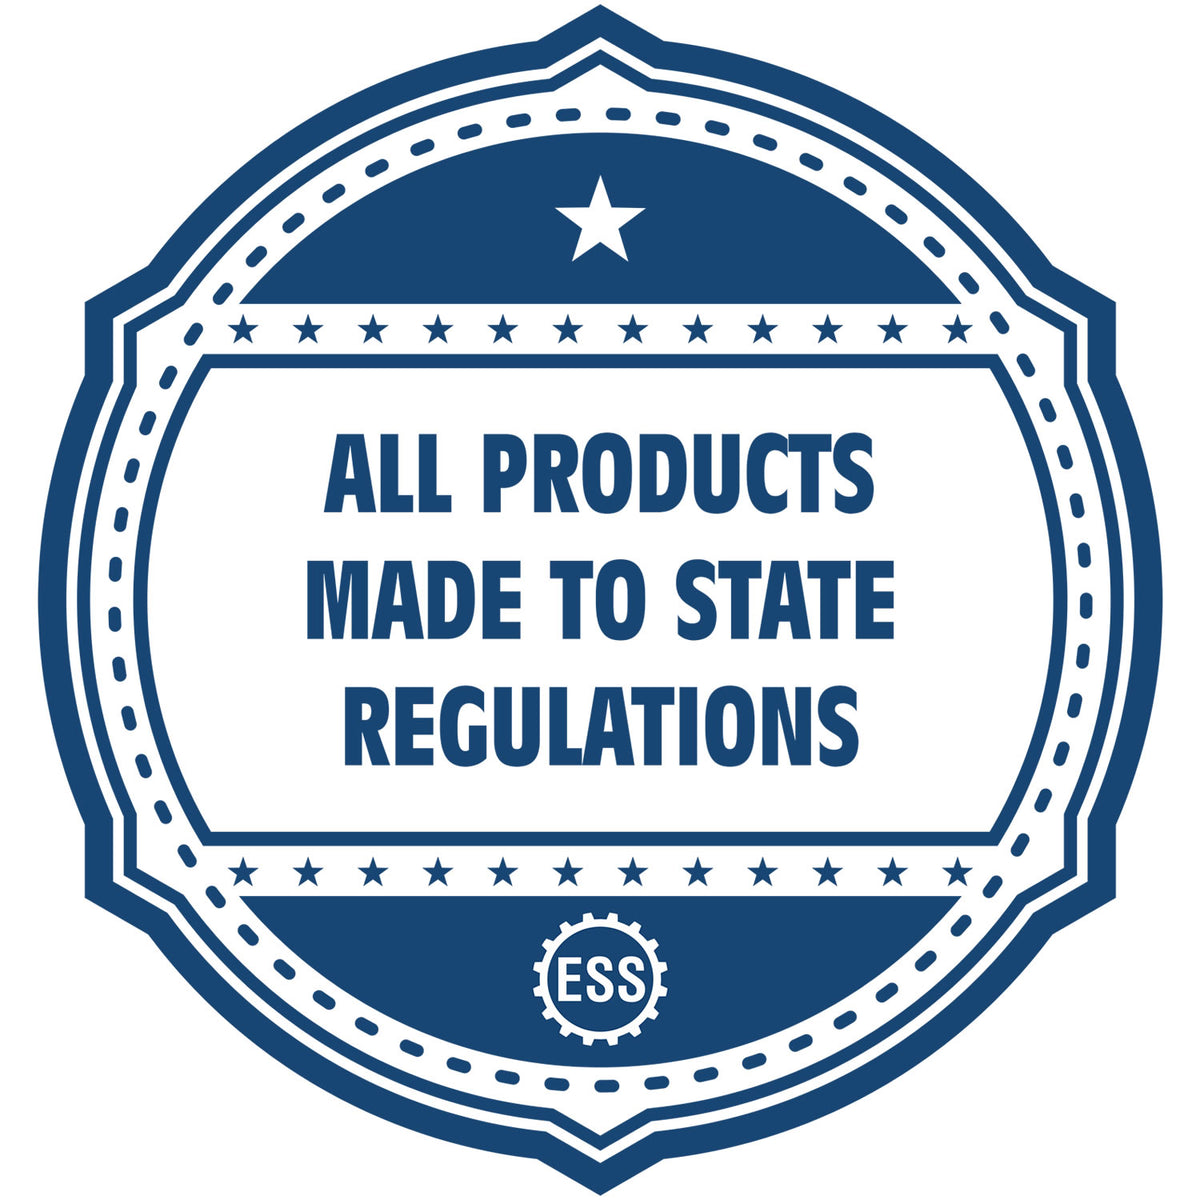 An icon or badge element for the Tennessee Desk Architect Embossing Seal showing that this product is made in compliance with state regulations.